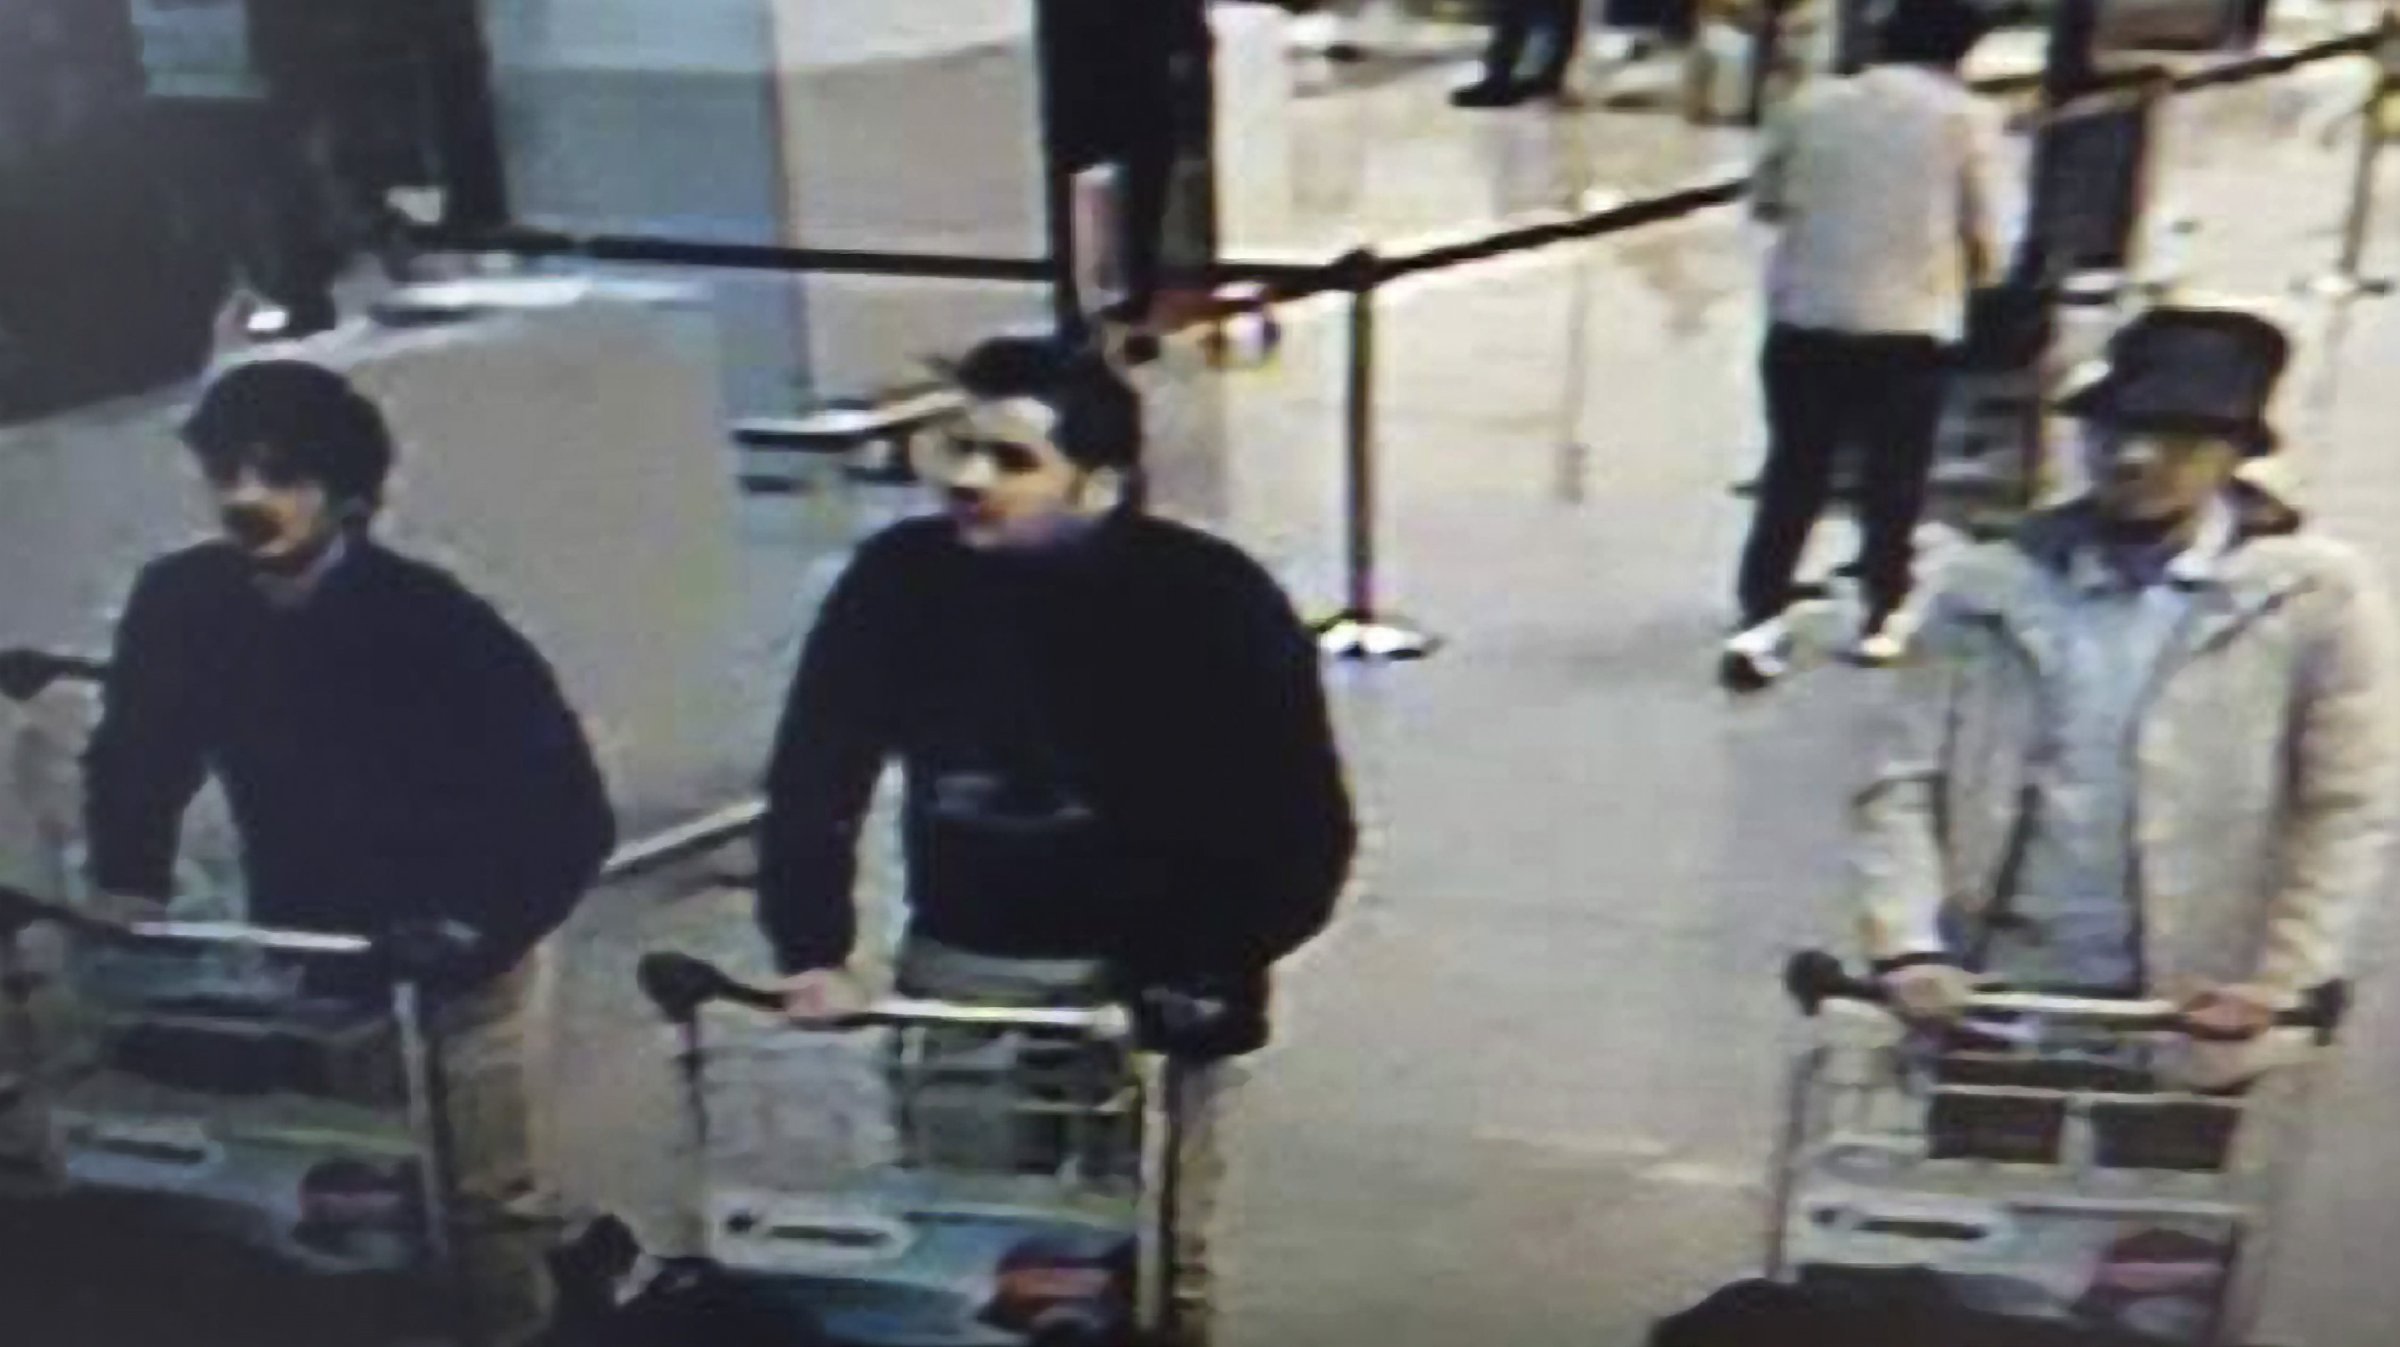 Terror attack at Brussels Airport / suspects